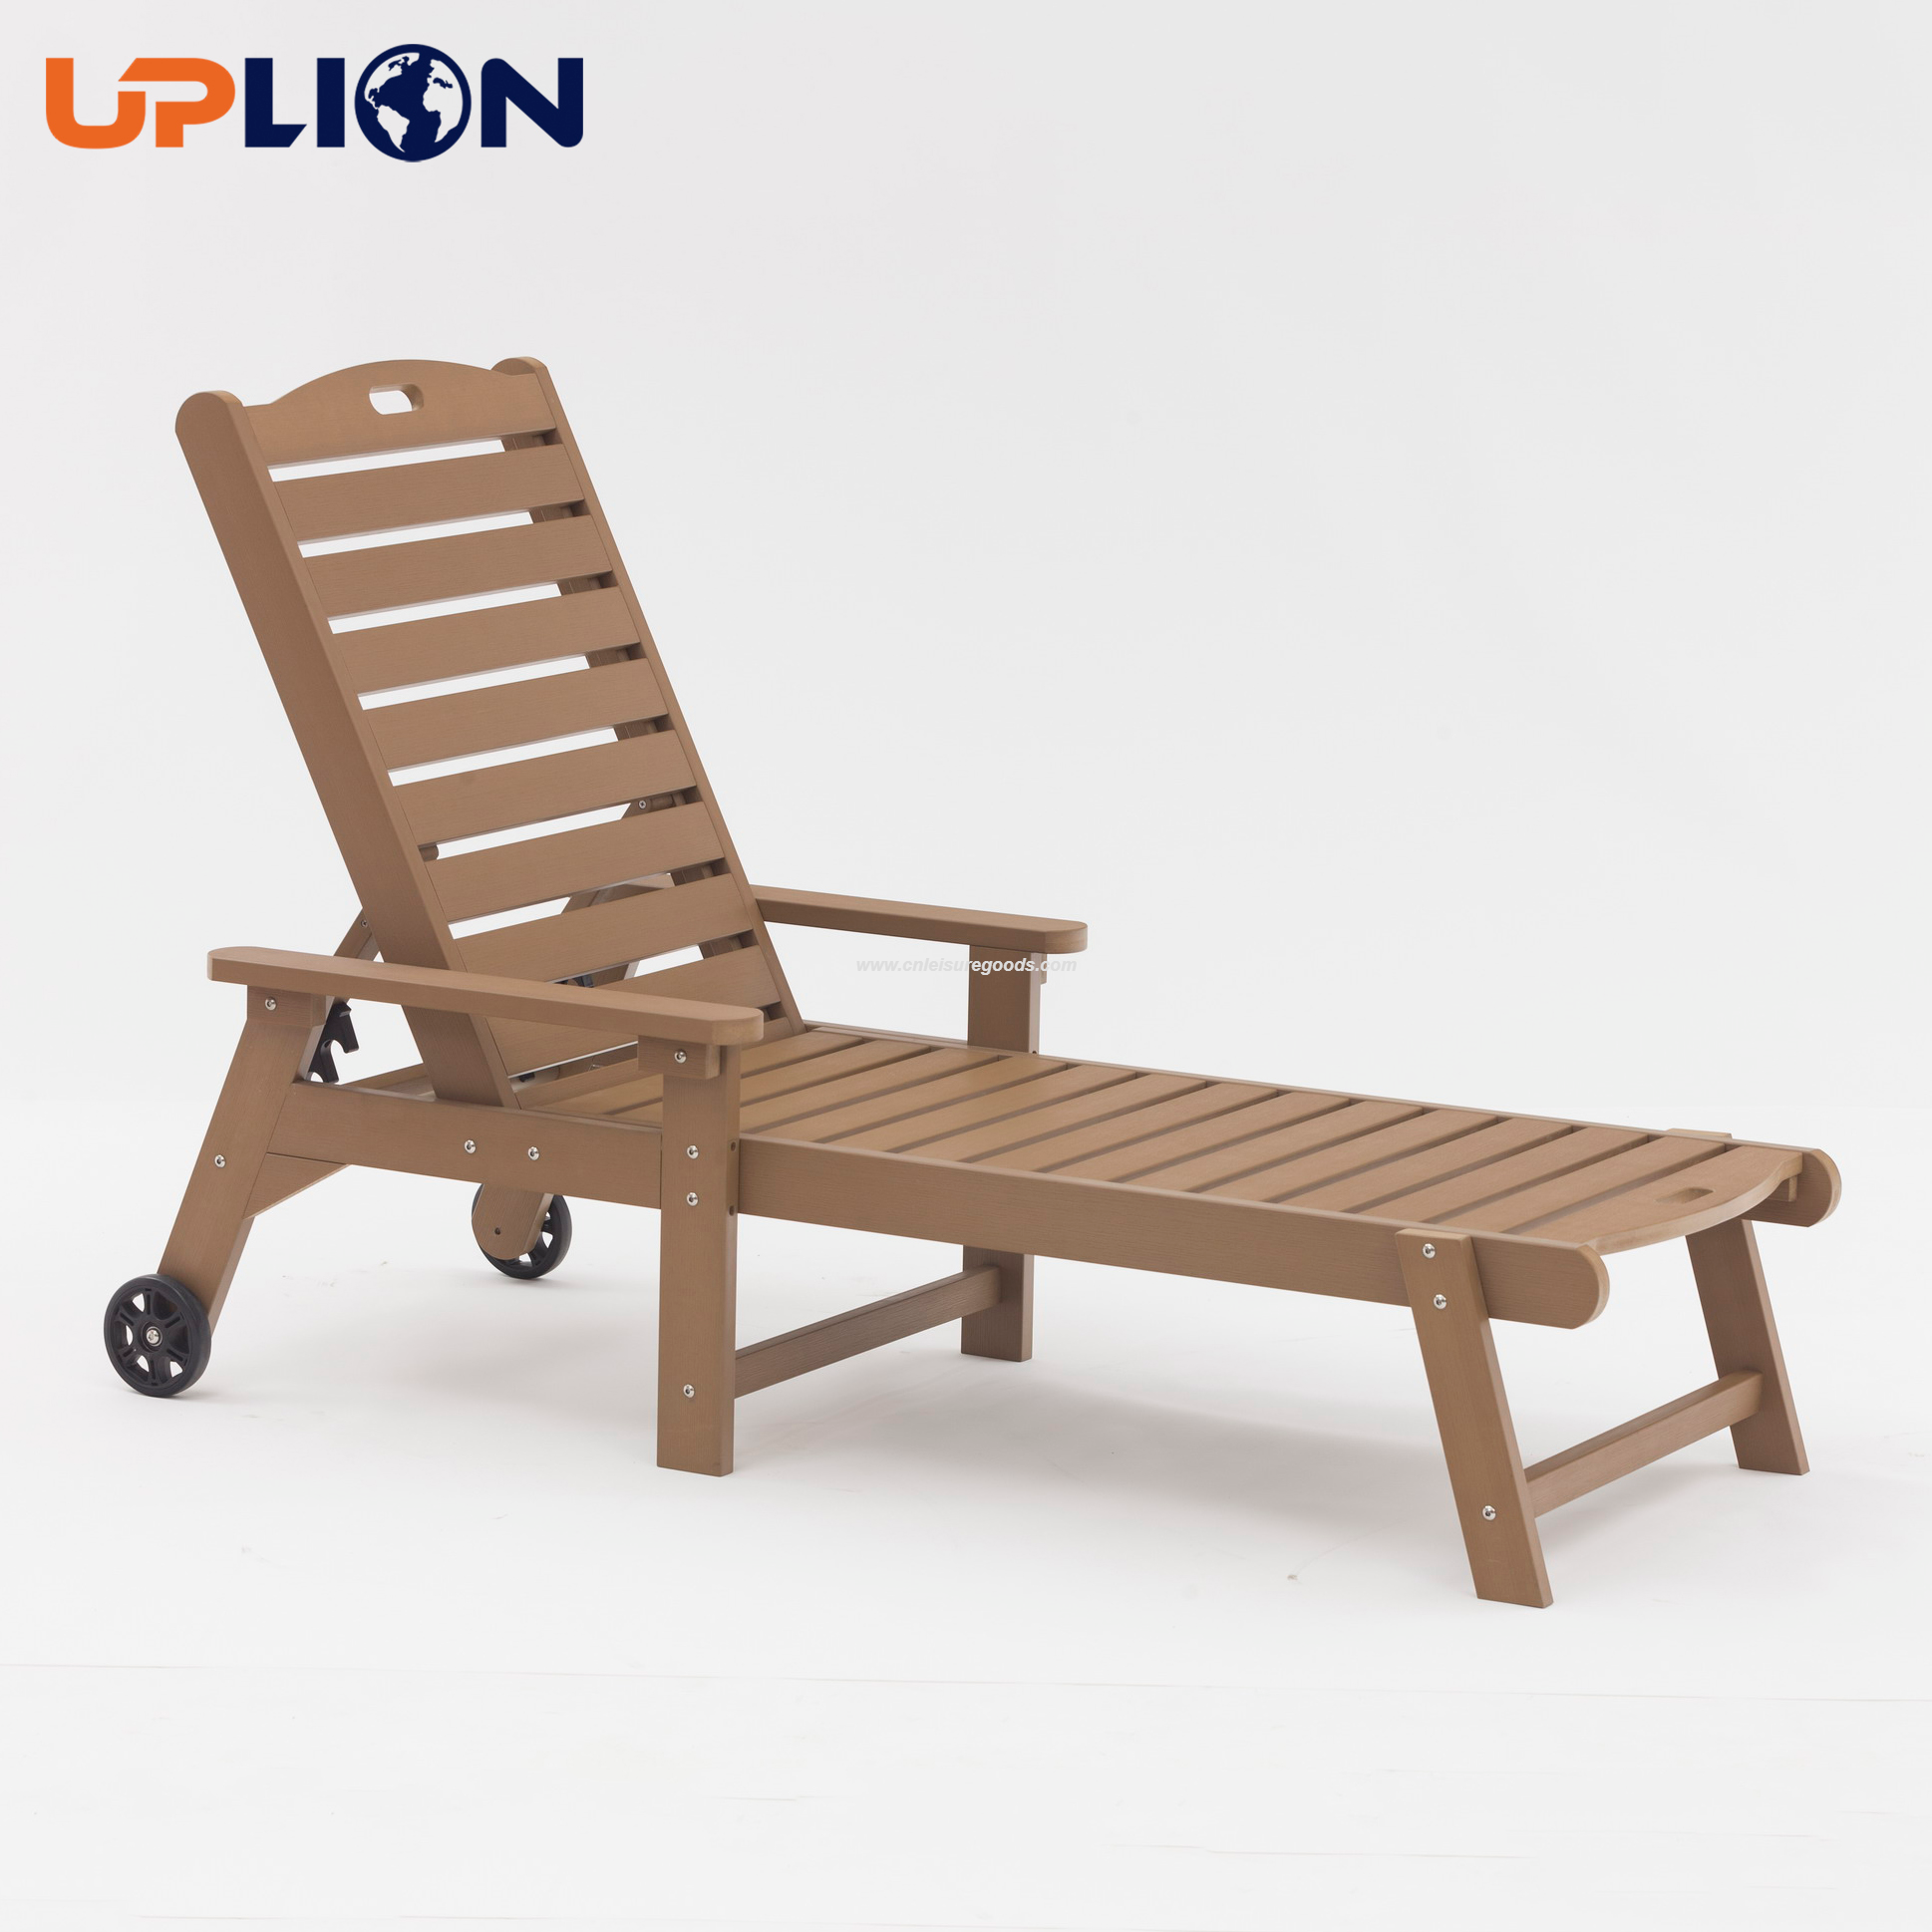 Uplion Outdoor Beach Lounge Chair Plastic Wood Sun Lounger Patio Pool Chaise Lounge